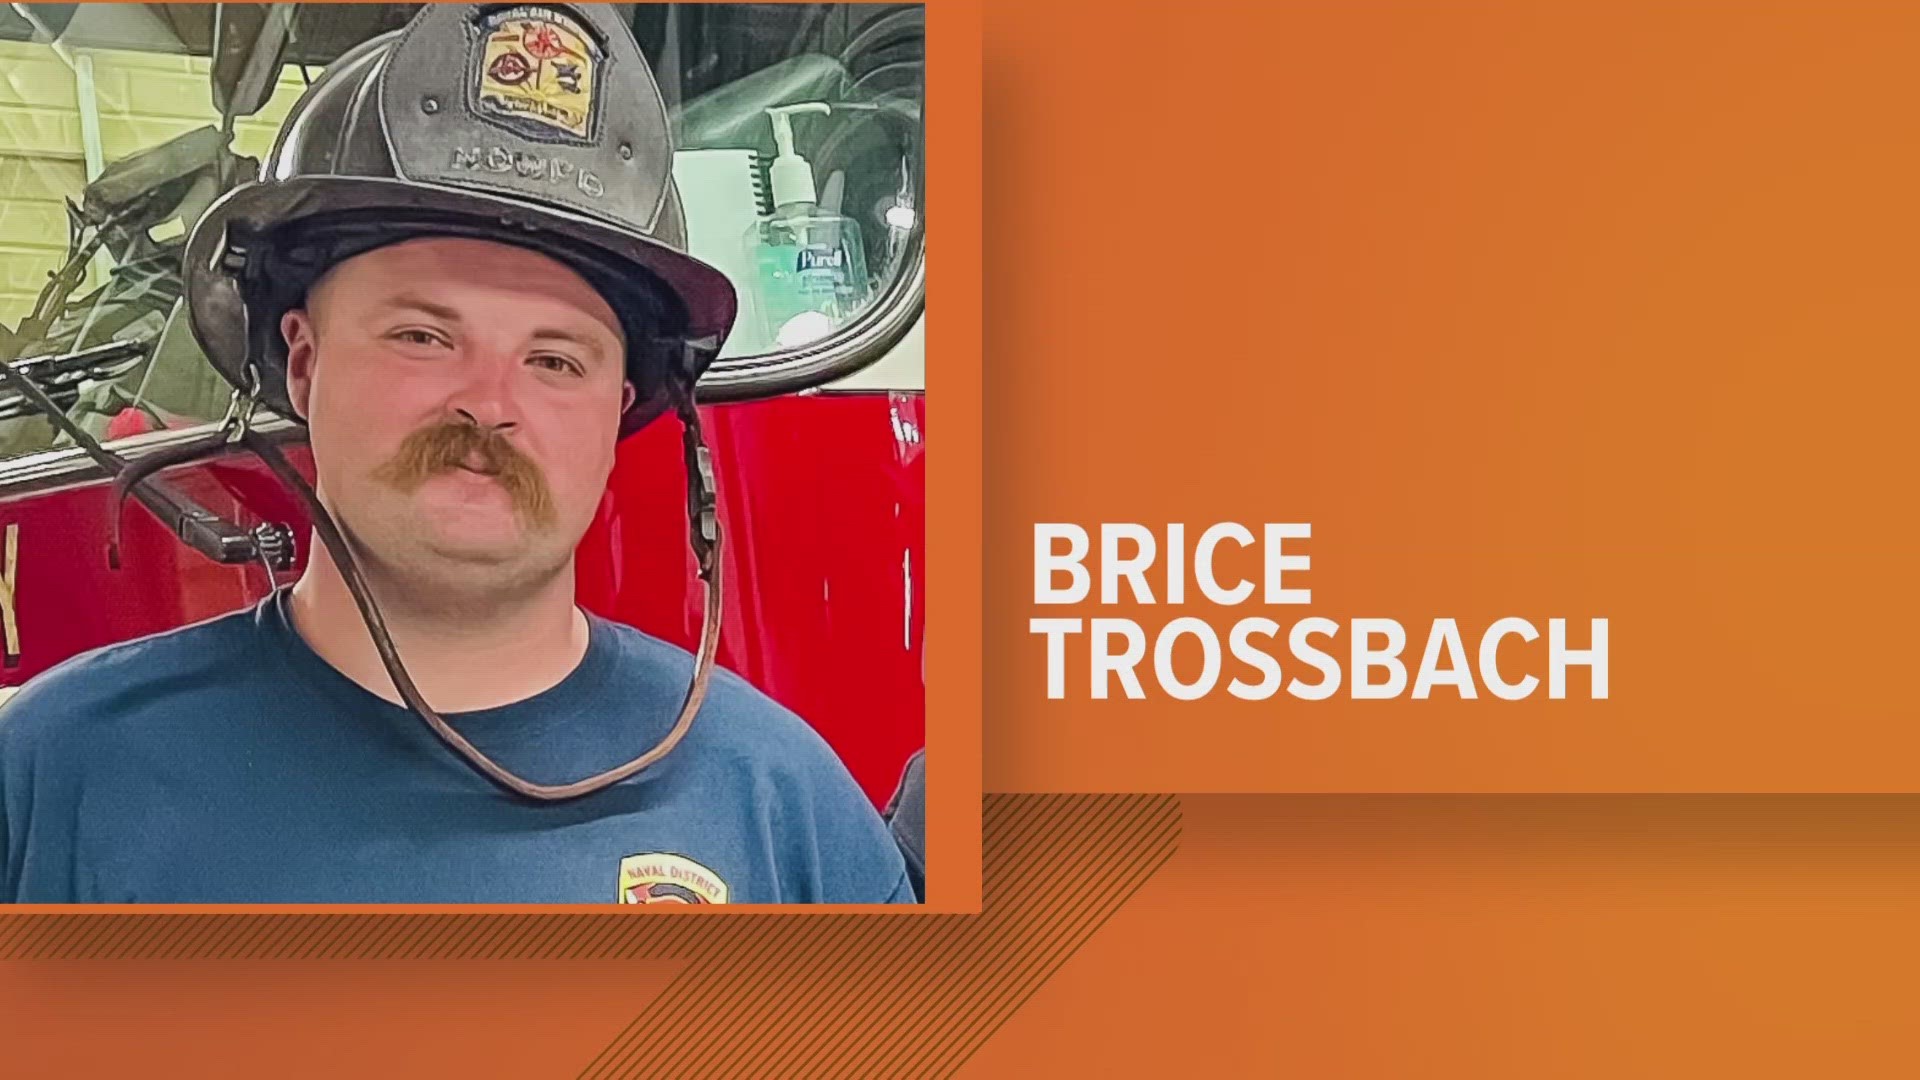 Brice C. Trossbach died in the line of duty responding to a two-alarm house fire in St. Mary's County.